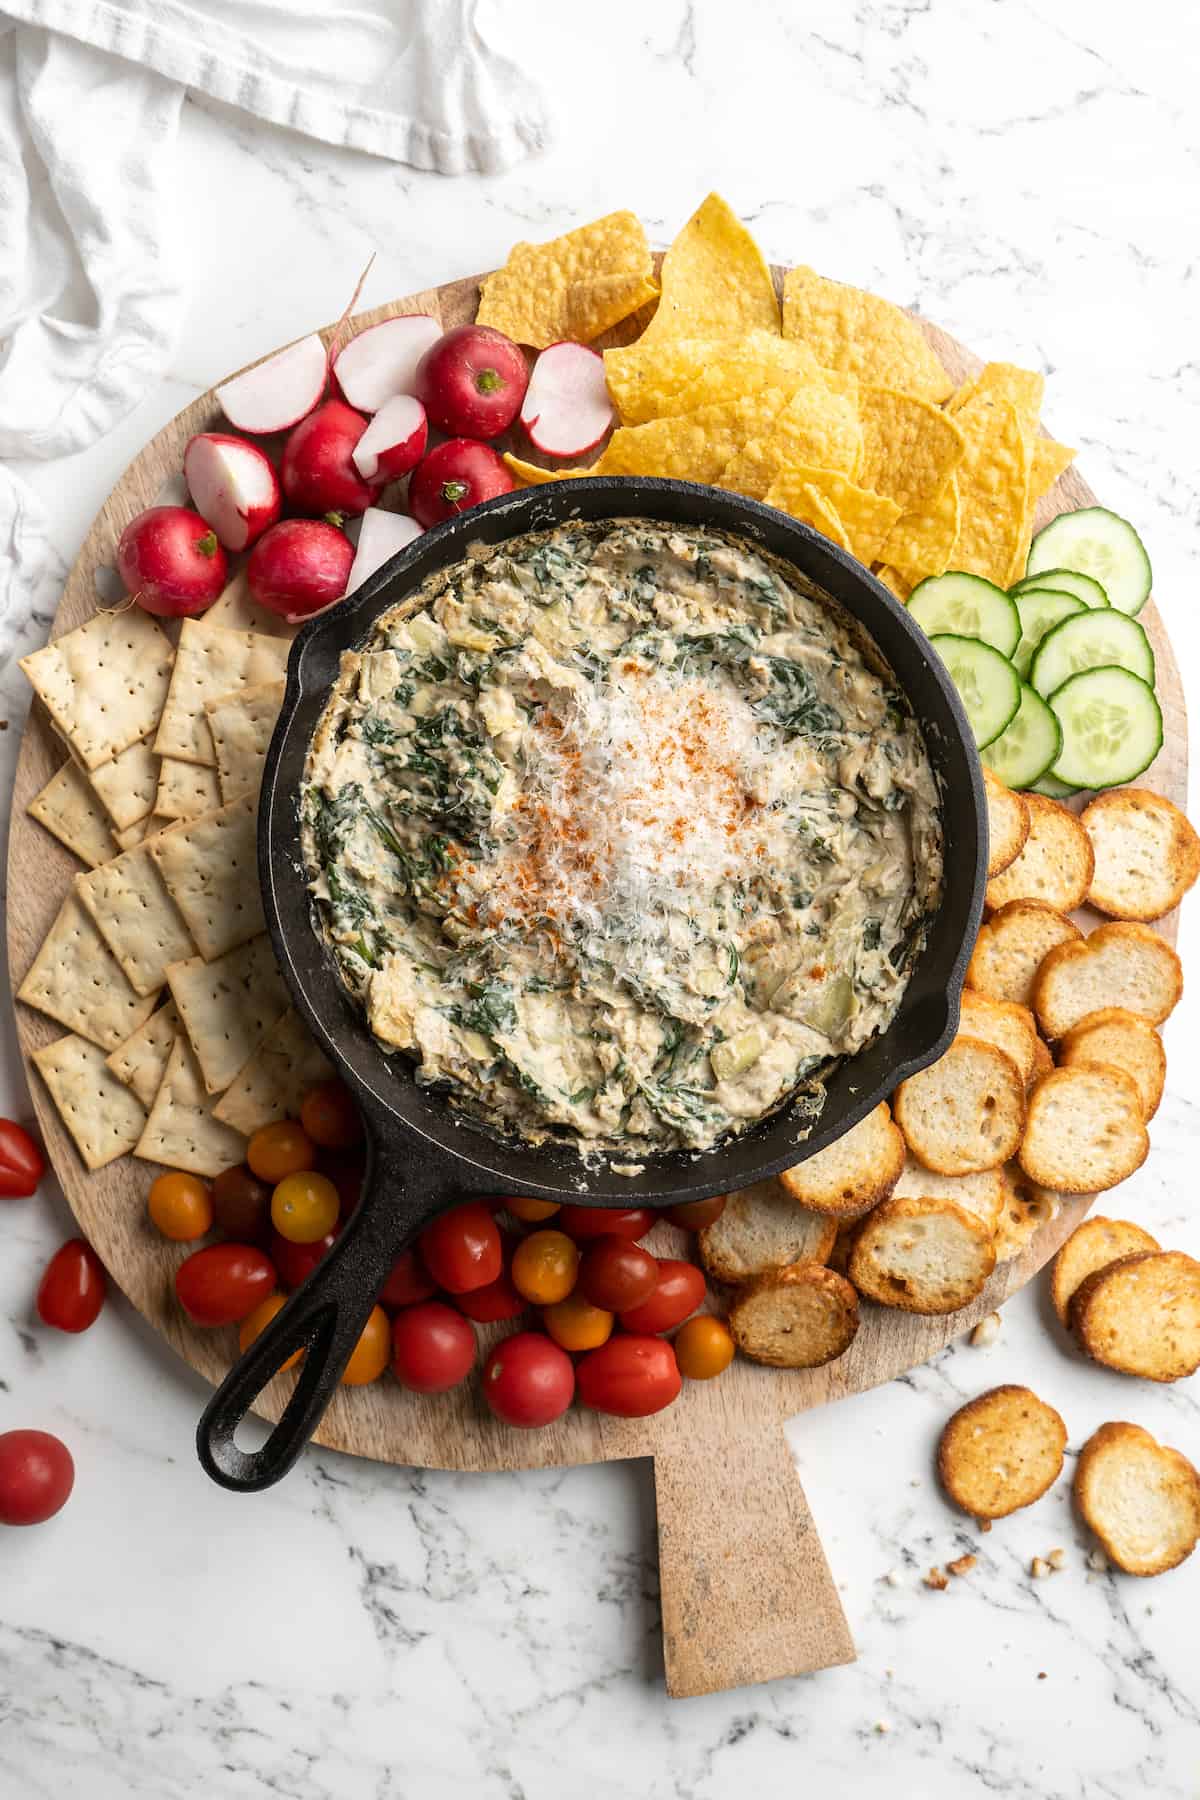 Overhead view of snack board with skillet of spinach artichoke dip, chips, vegetables, and crackers